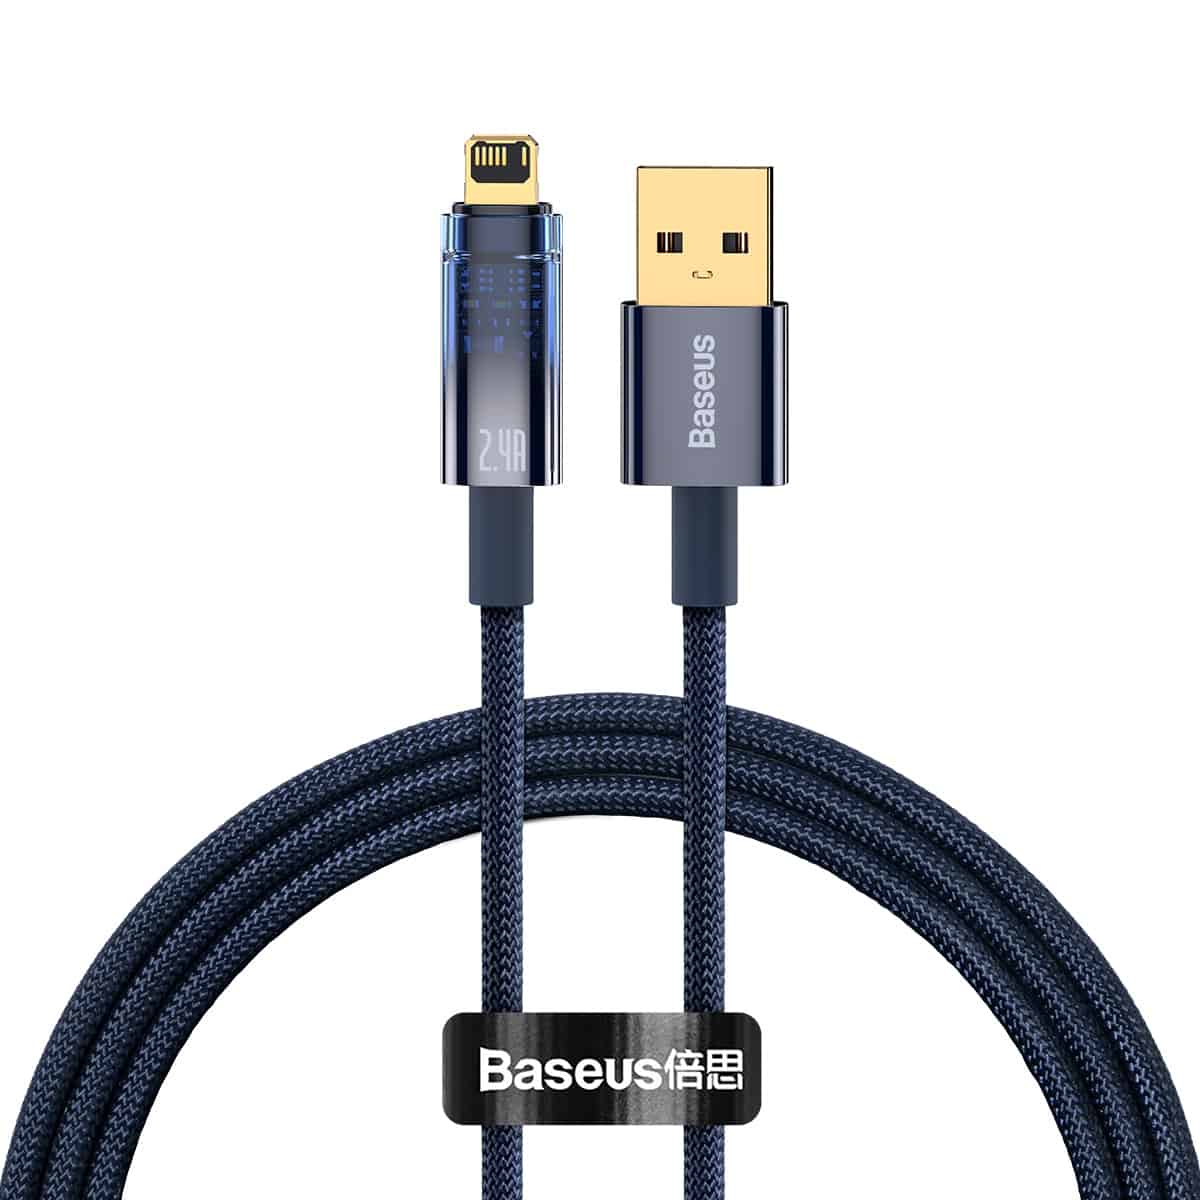 Baseus Explorer Series Auto Power-Off Fast Charging Data Cable USB to iPhone 2.4A